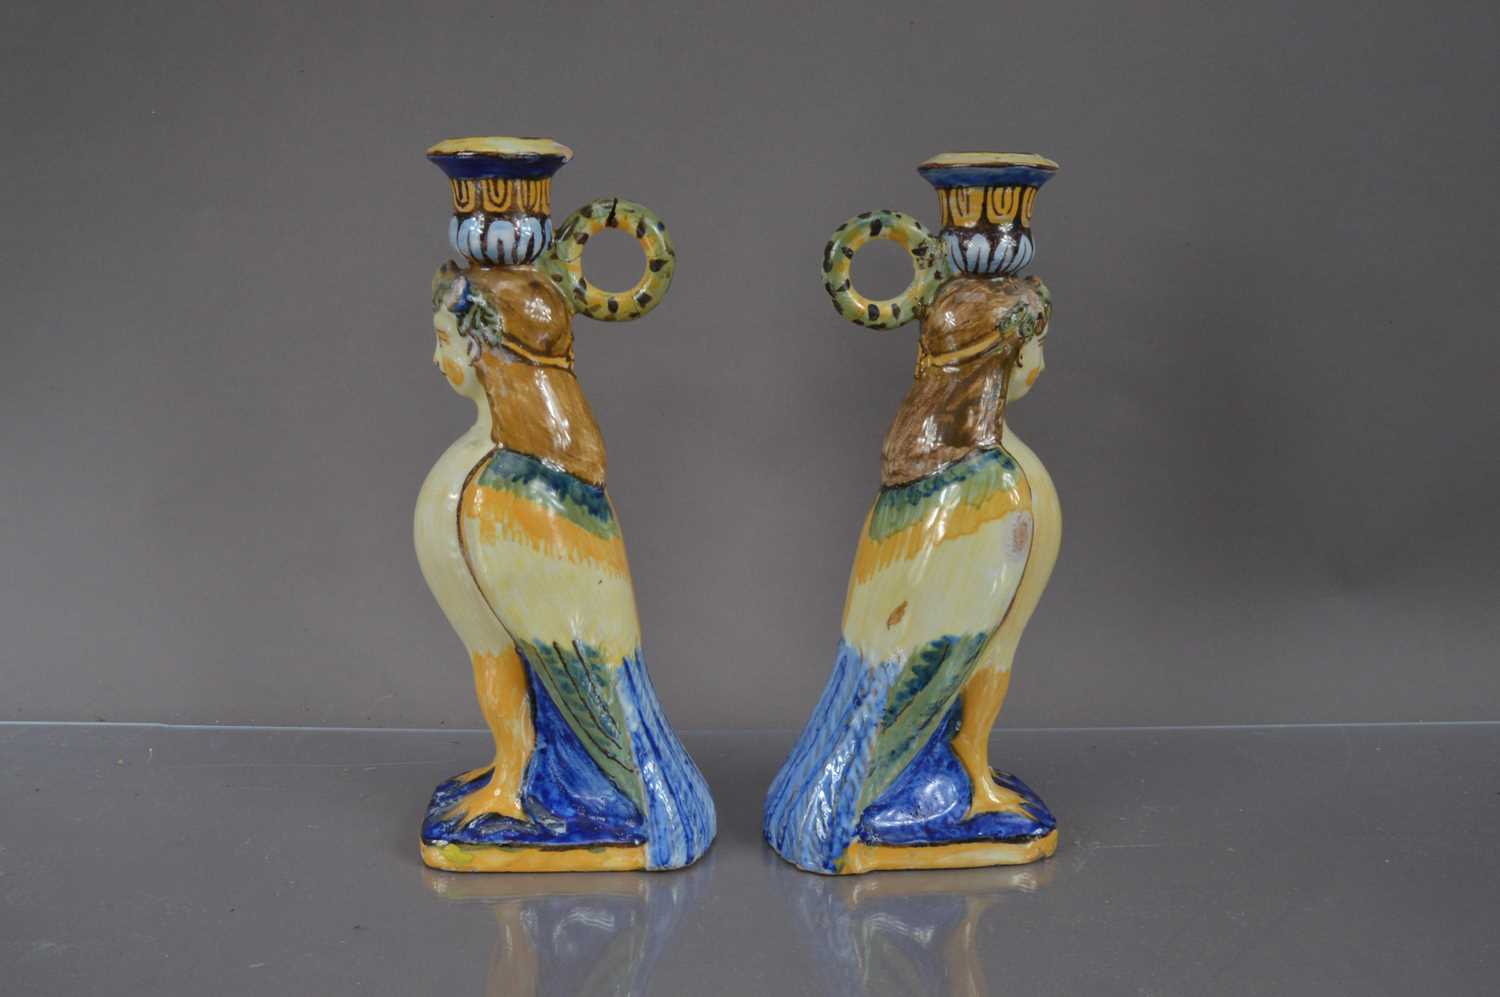 Lot 402 - A pair of faience or majolica neoclassical harpy form candlesticks